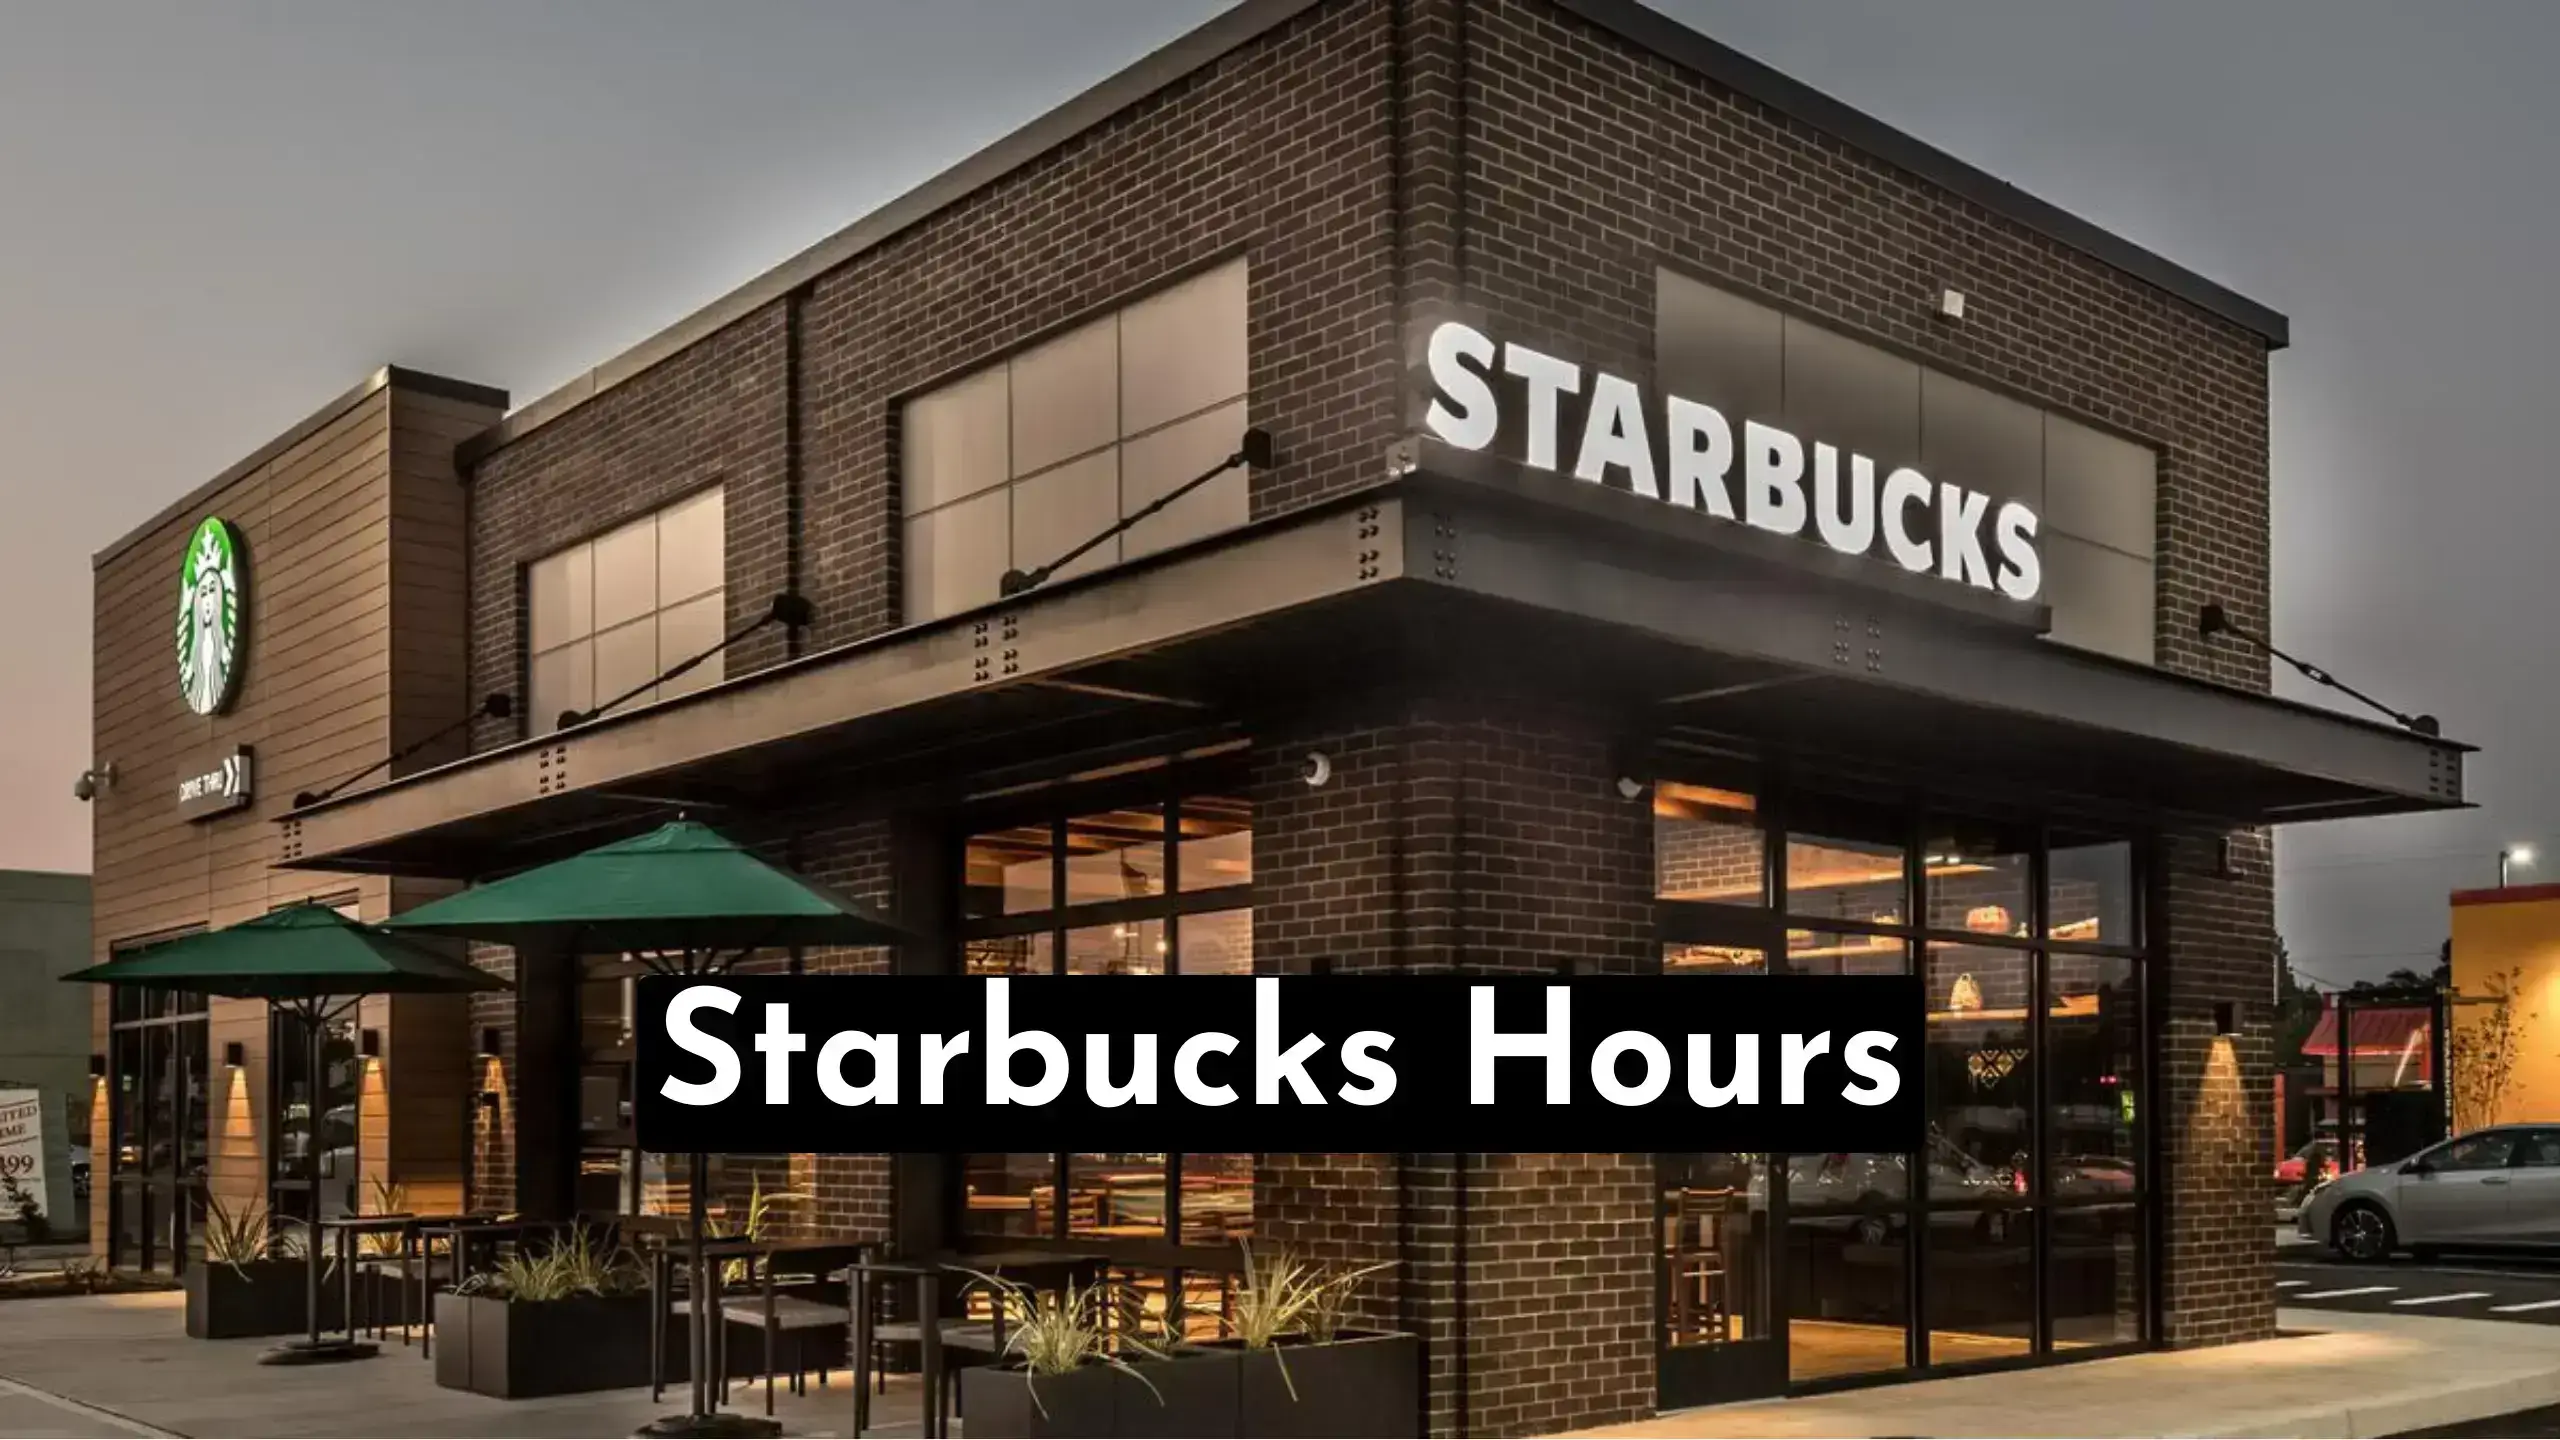 Discover Starbucks Hours for 2023: Open from 5-8 AM, closing 6-10 PM. Use store locator or Google Maps to find your nearest spot. ☕🕔🌟